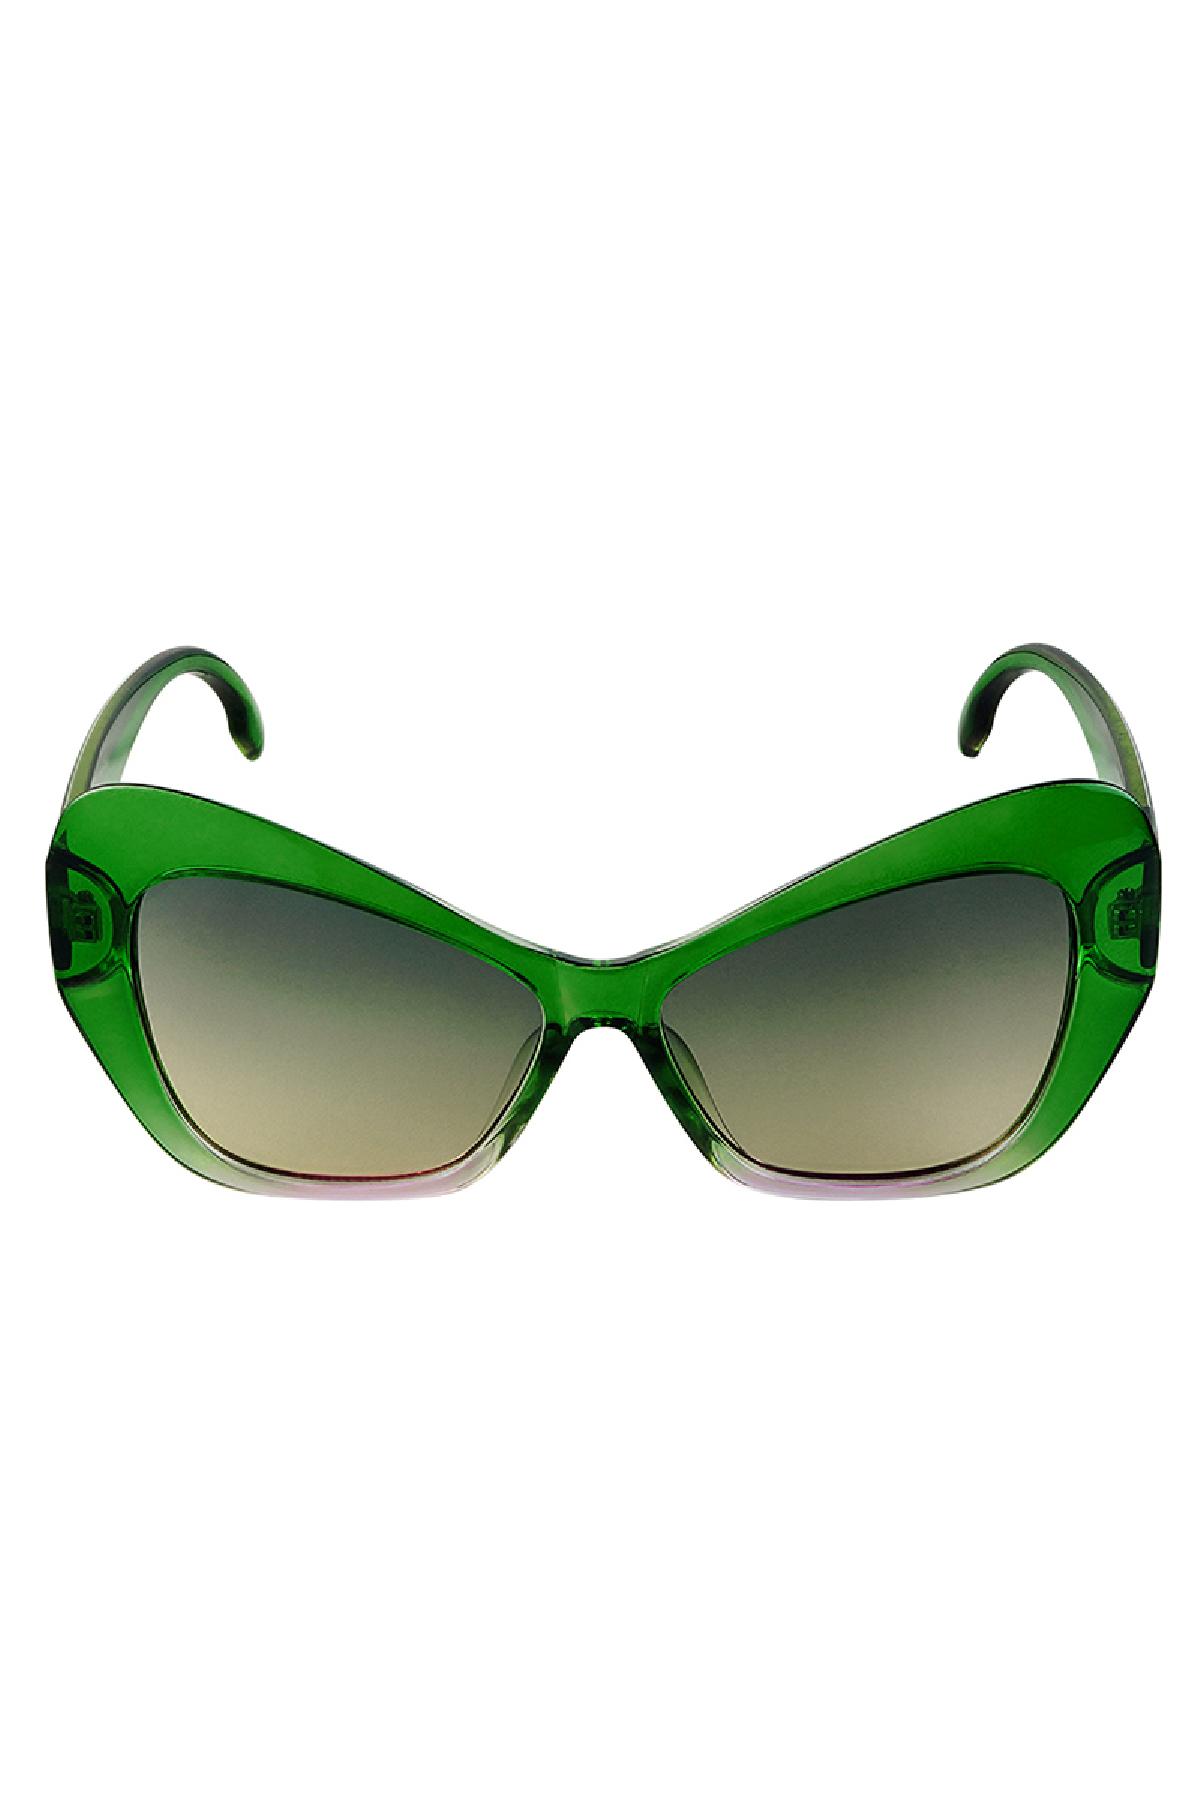 Sunglasses statement Green PC One size h5 Picture3